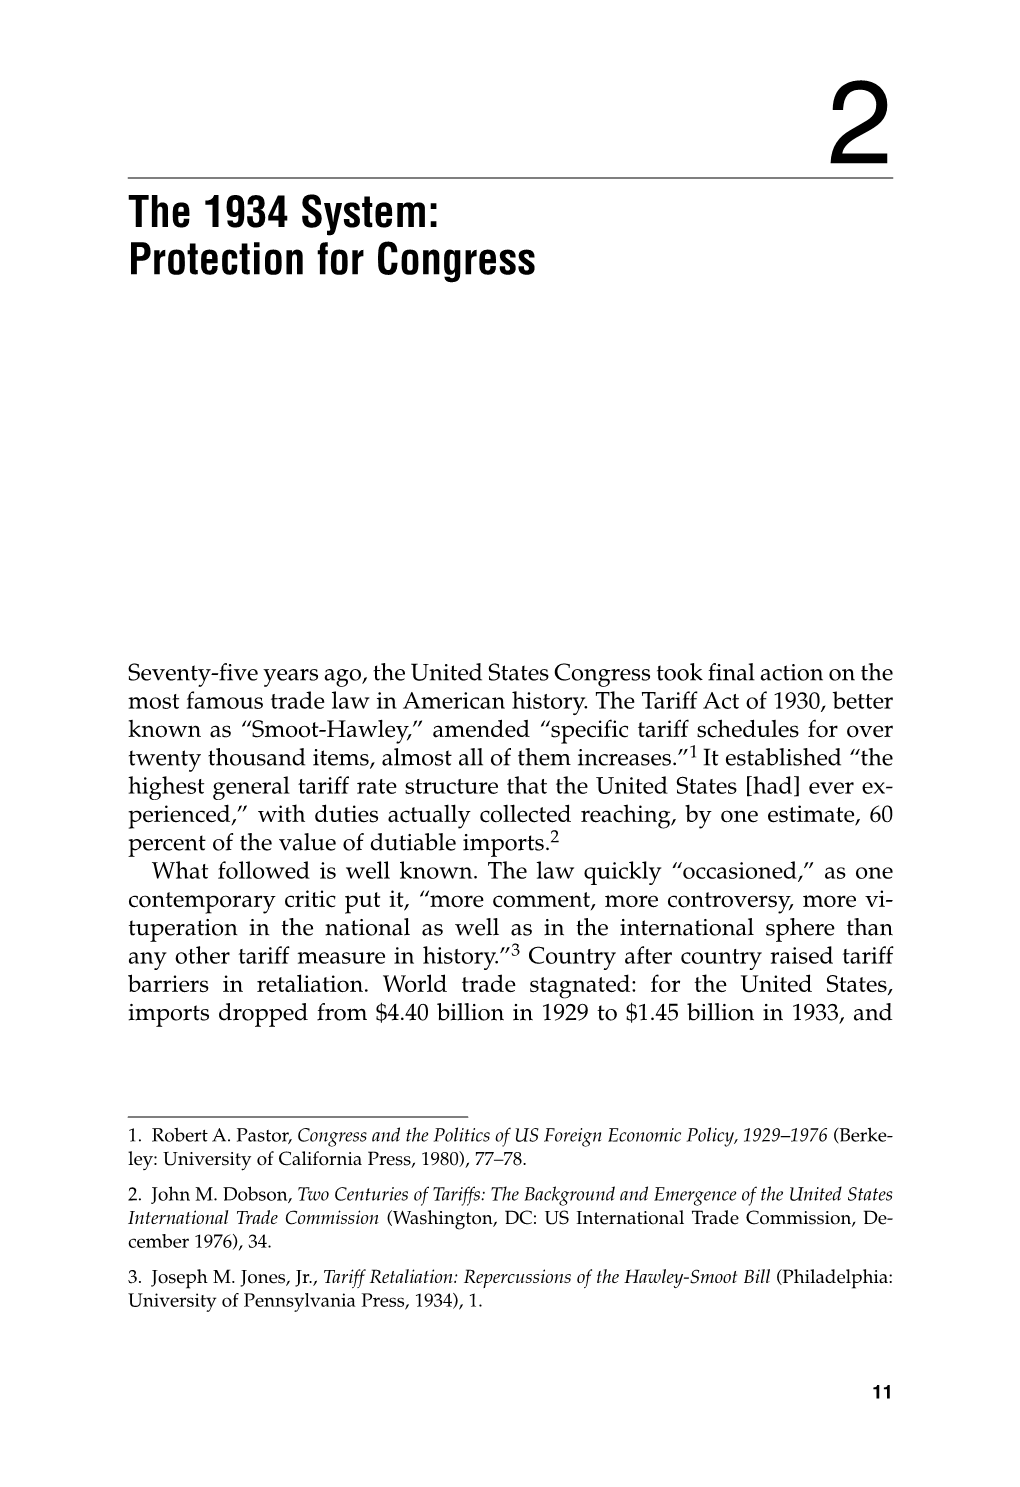 Chapter 2 the 1934 System: Protection for Congress